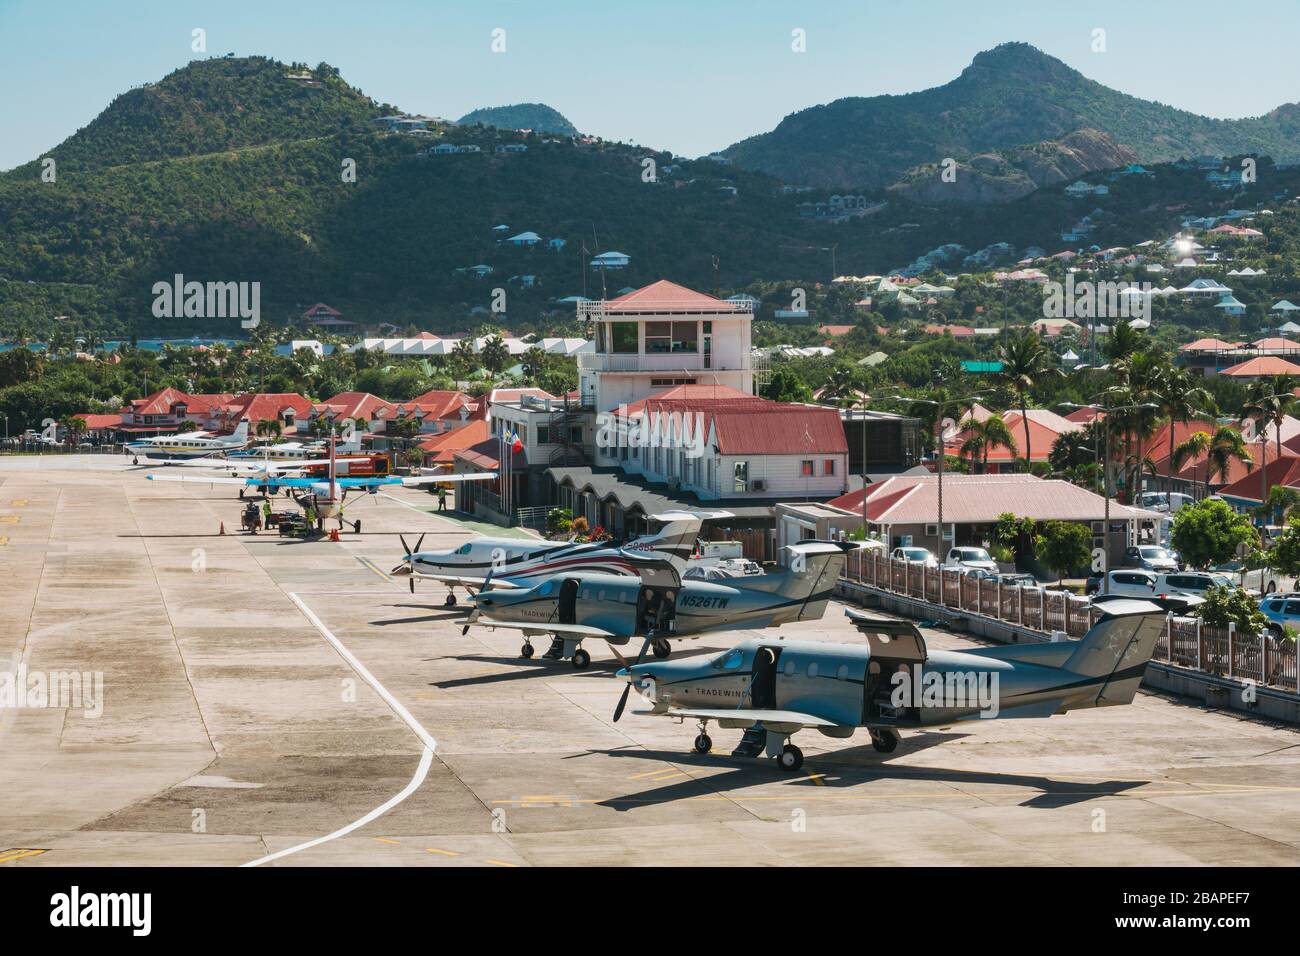 A row of aircraft parked in front of the small terminal building at Saint Barthélemy Airport Stock Photo